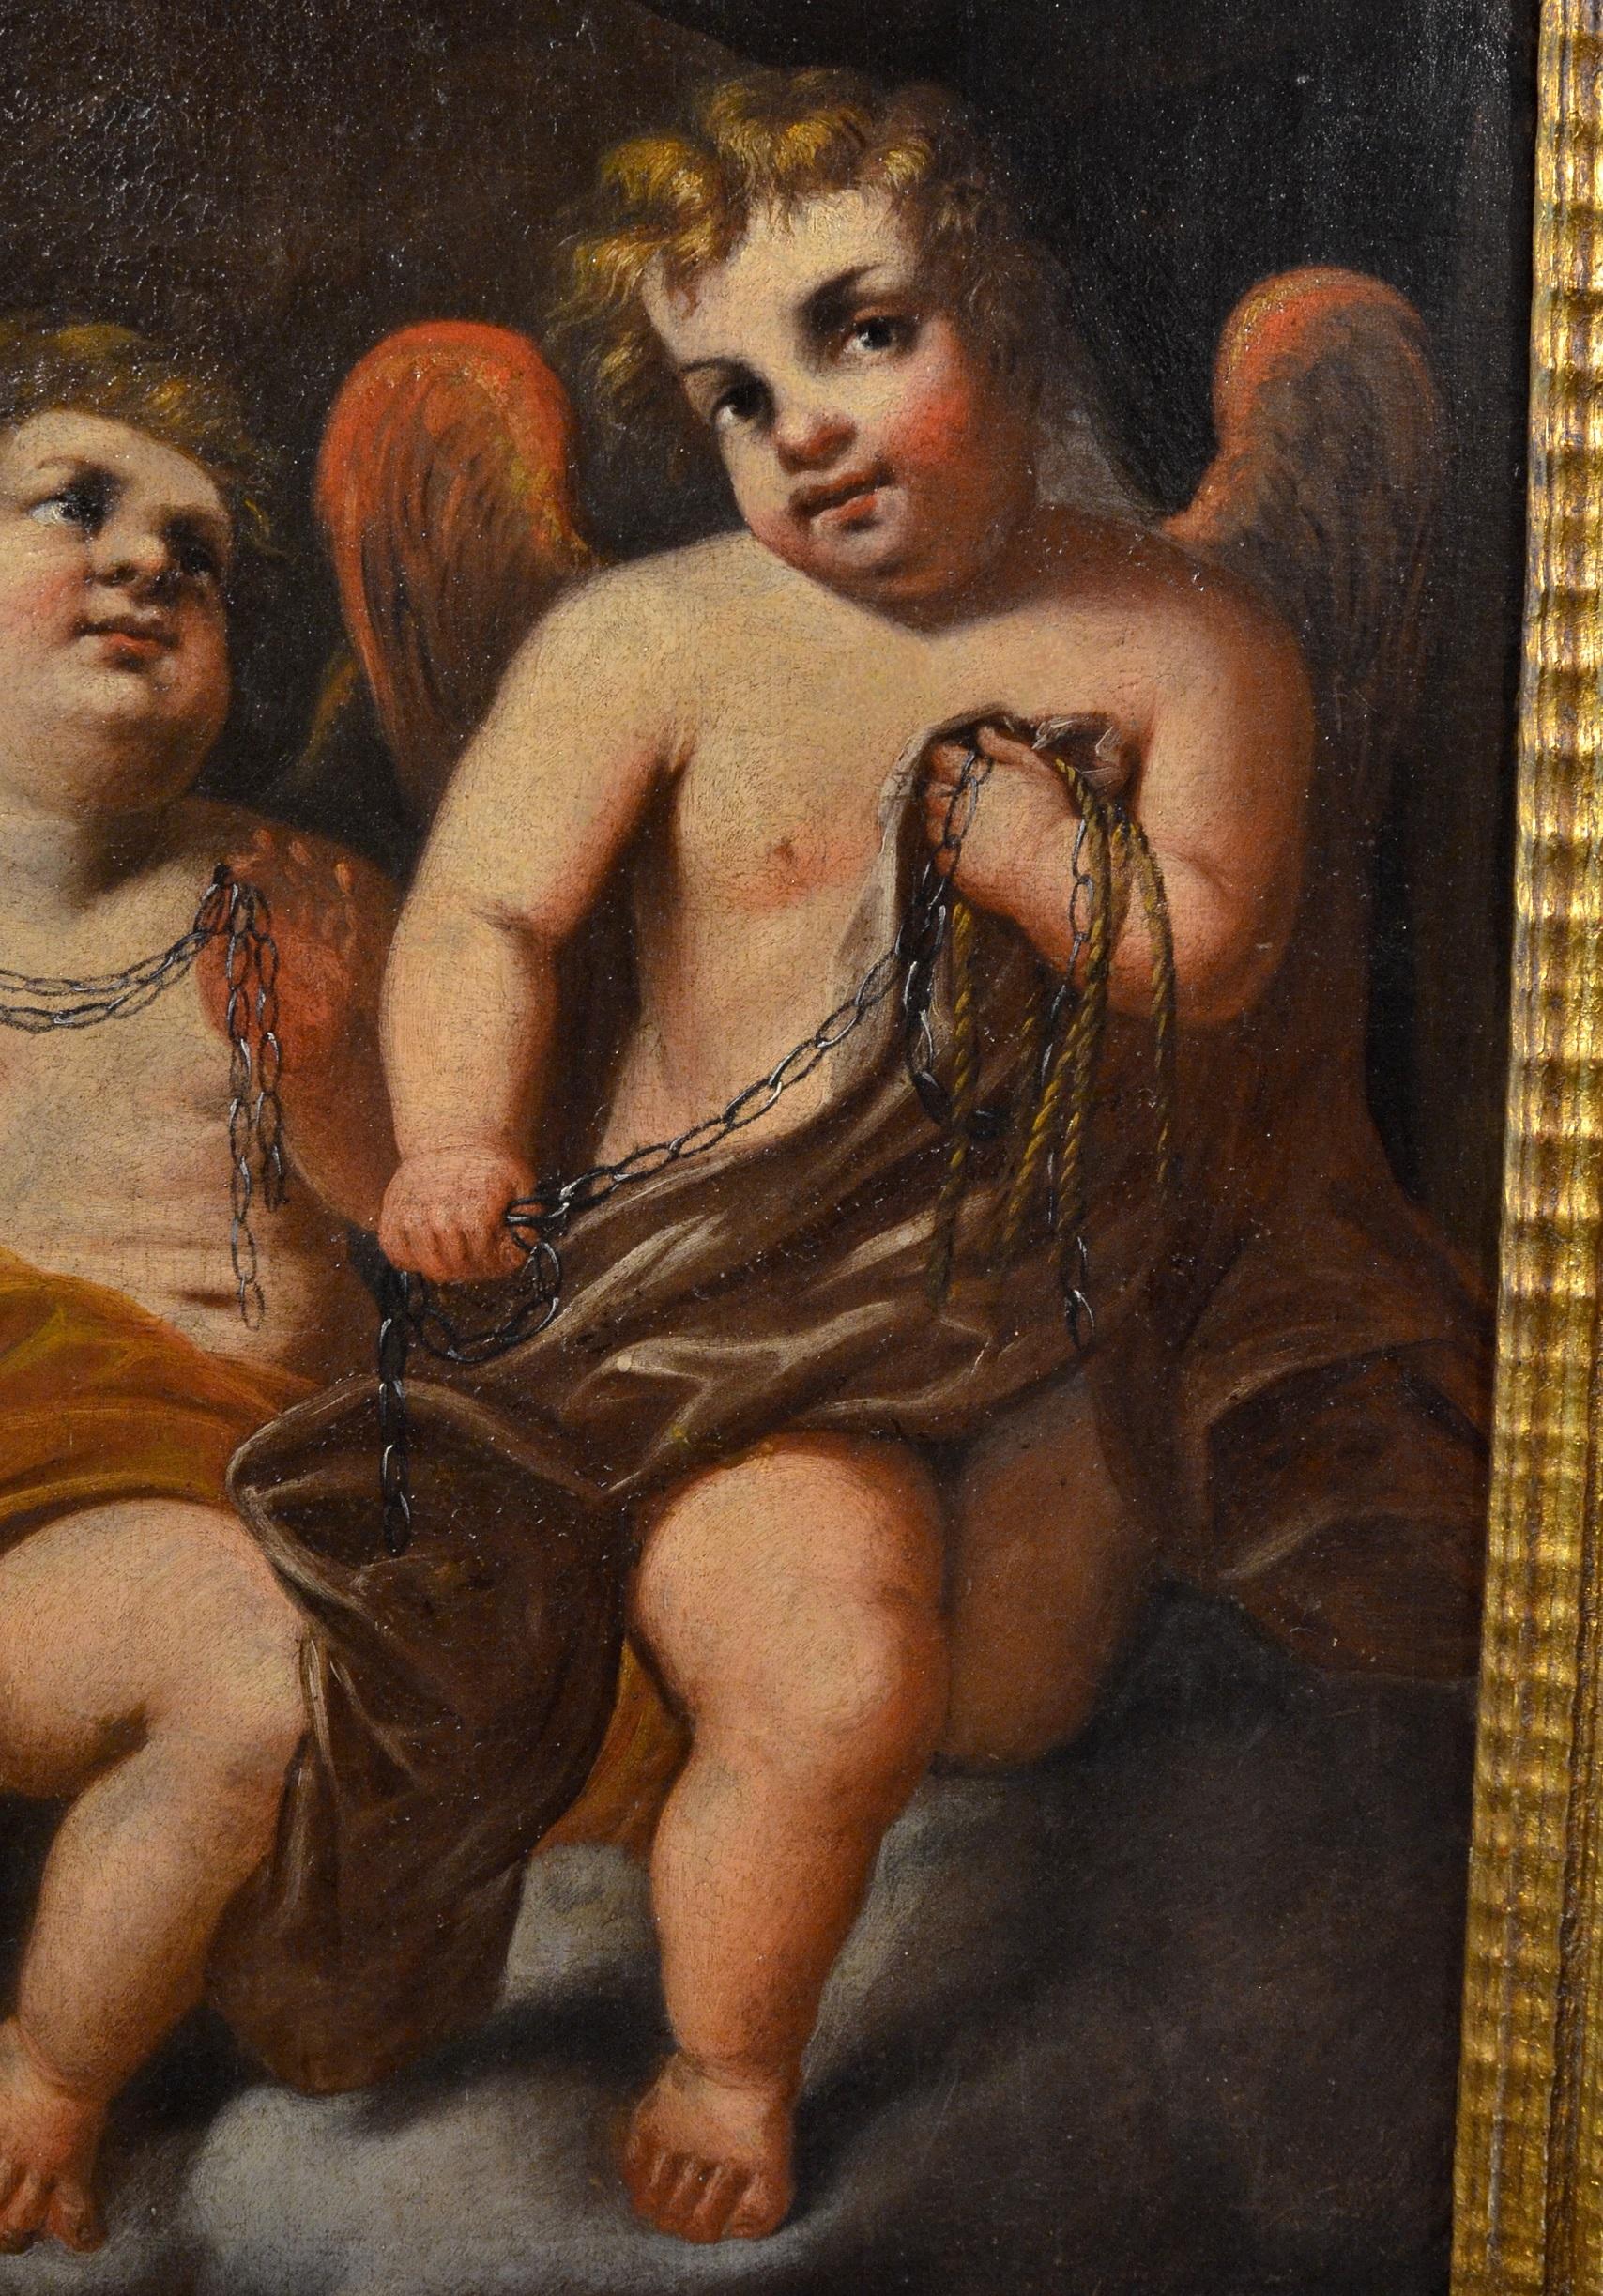 Winged Putti Paint Oil on canvas Baroque 17th Century Mitological Michelangelo  For Sale 1